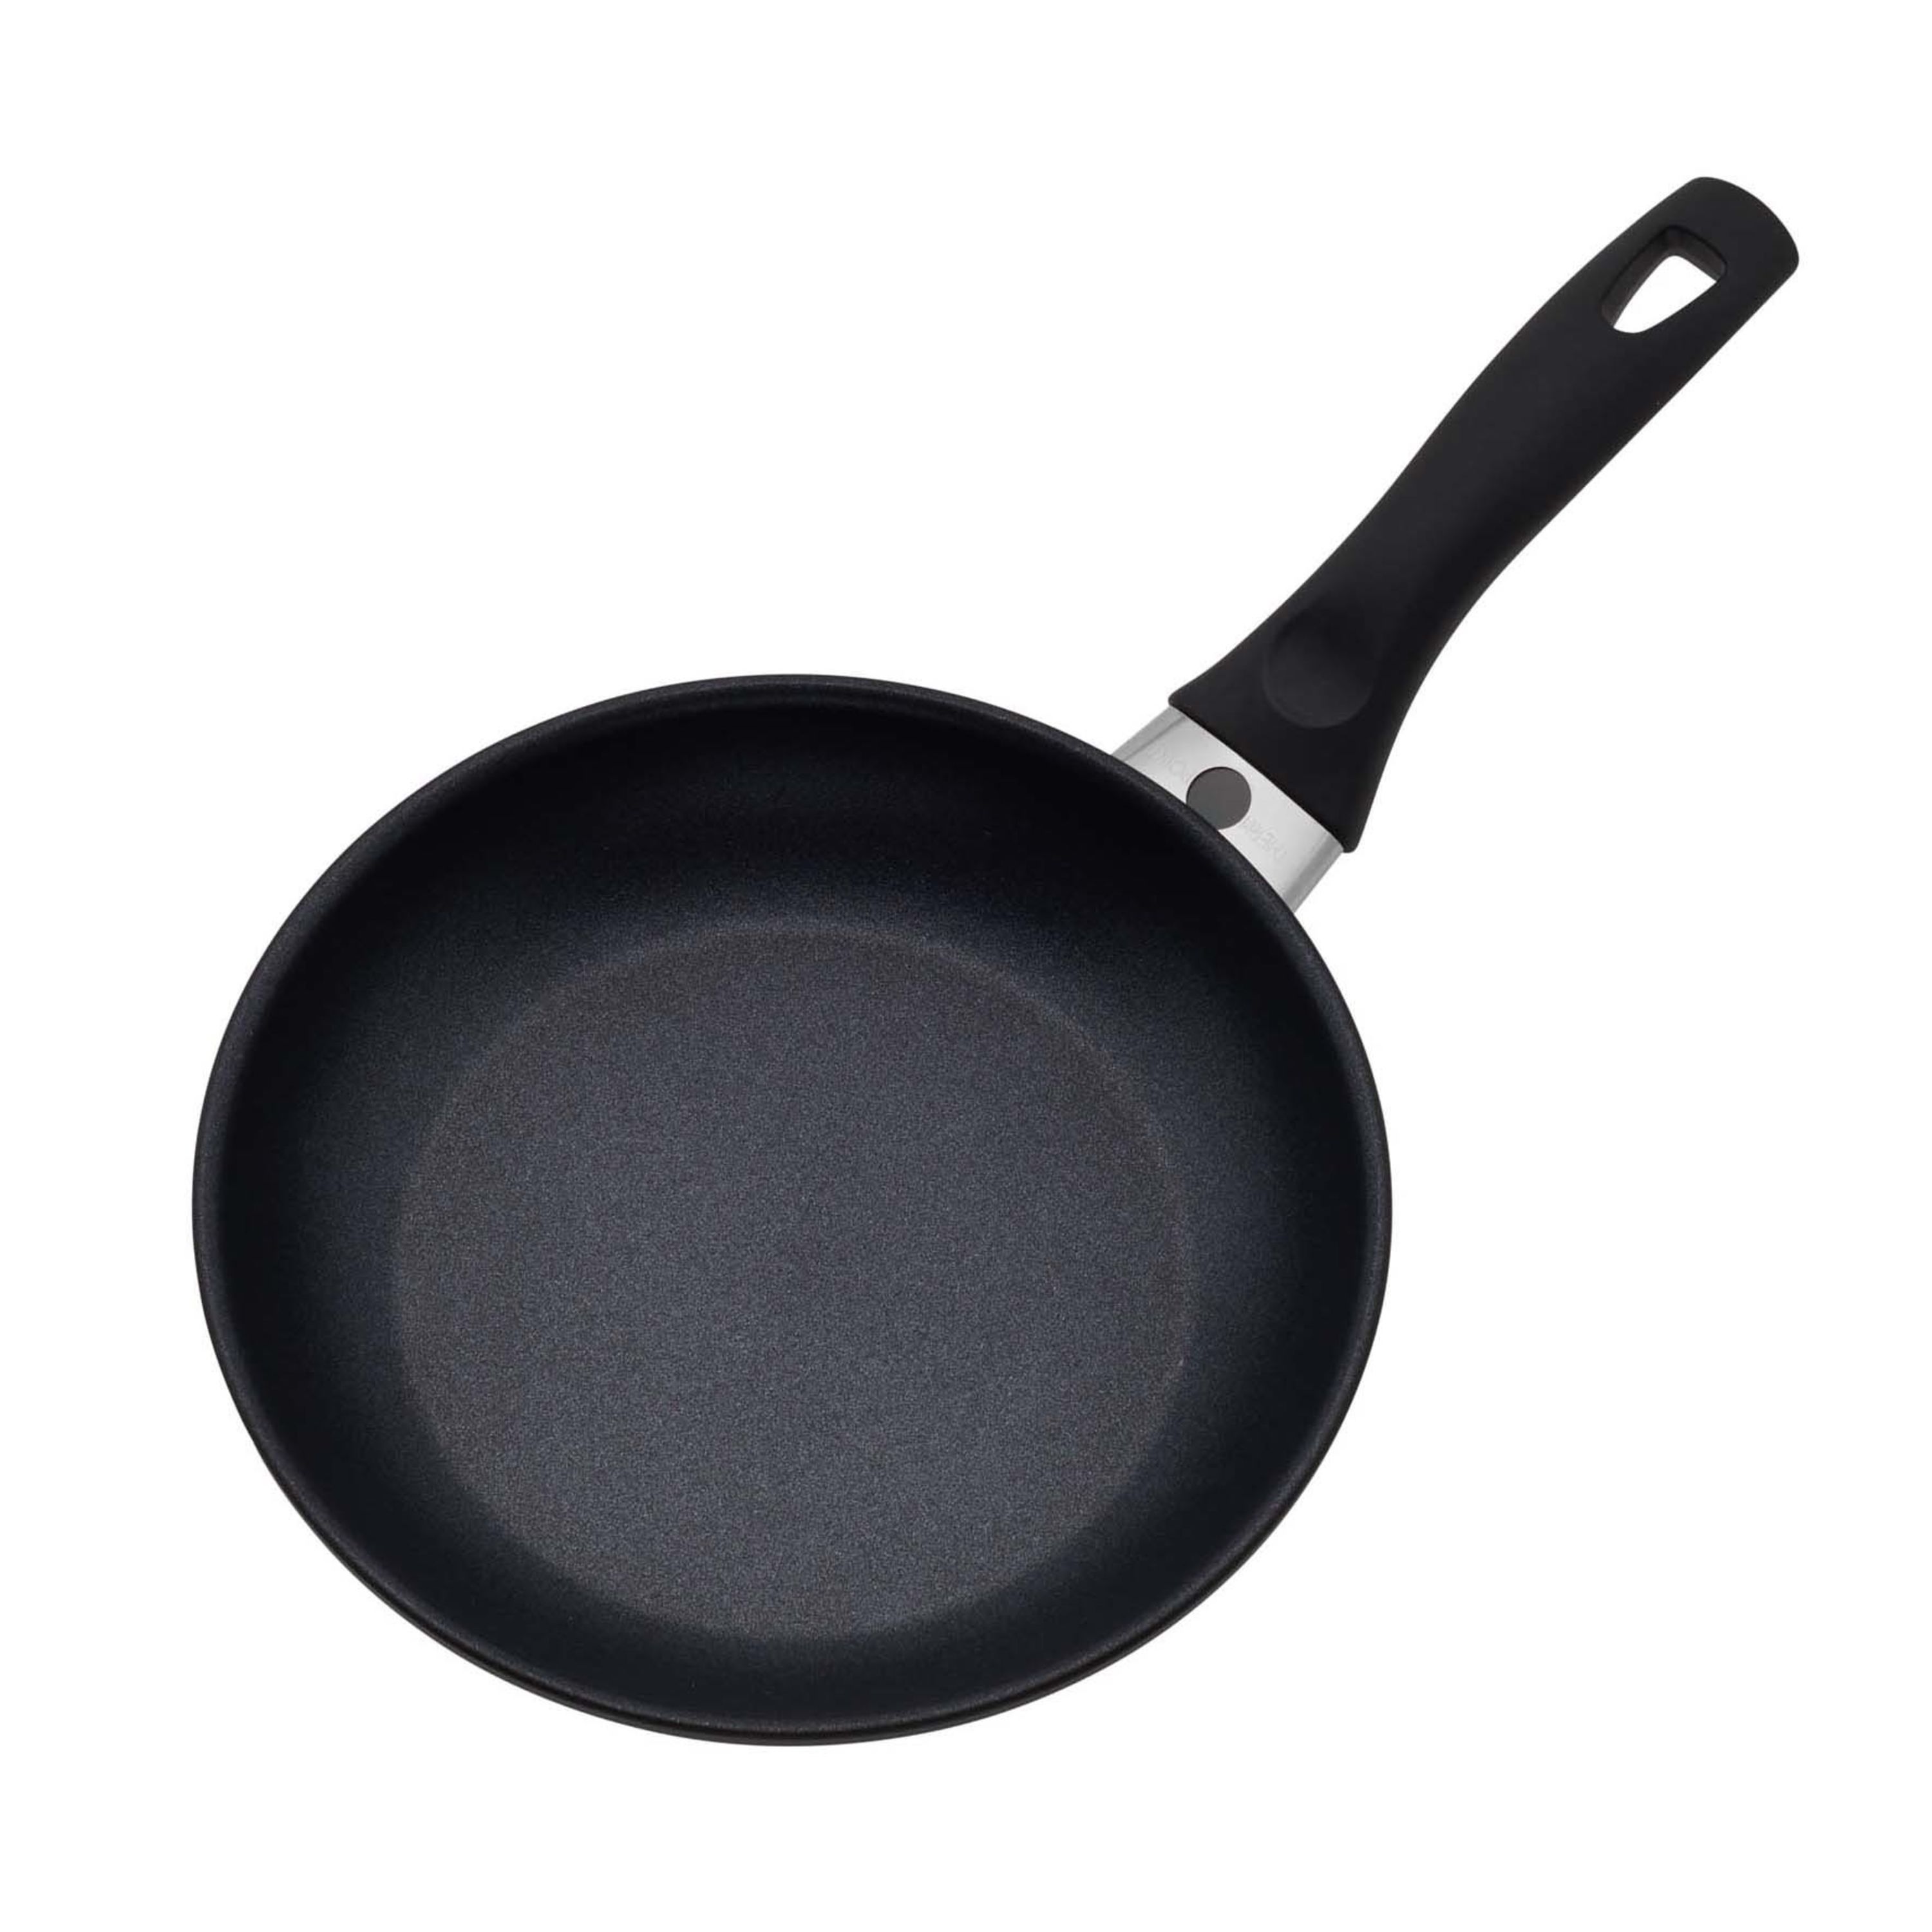 Ecolution Elements 11 In. Green Aluminum Non-Stick Fry Pan